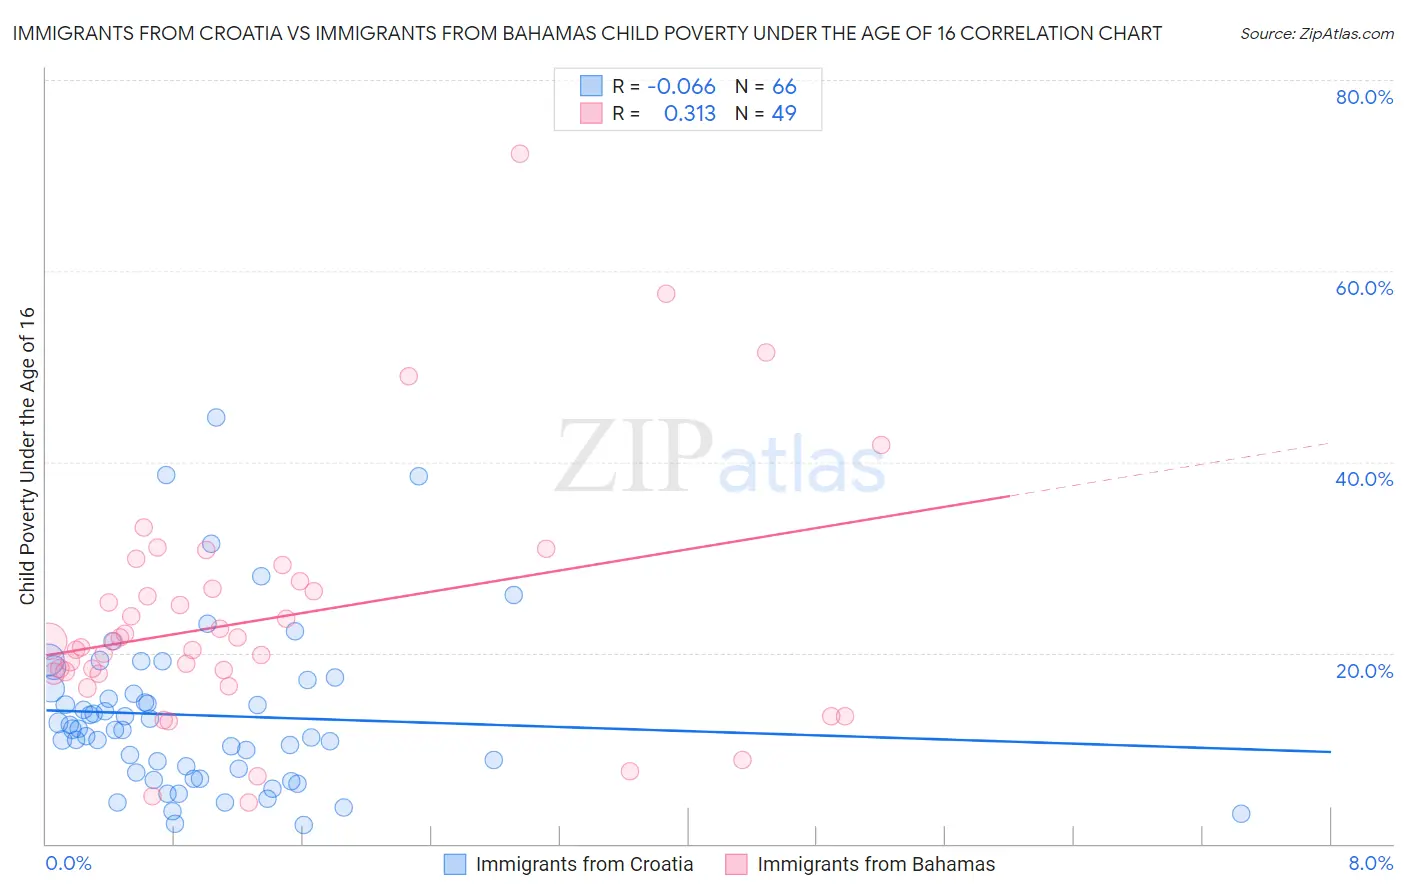 Immigrants from Croatia vs Immigrants from Bahamas Child Poverty Under the Age of 16